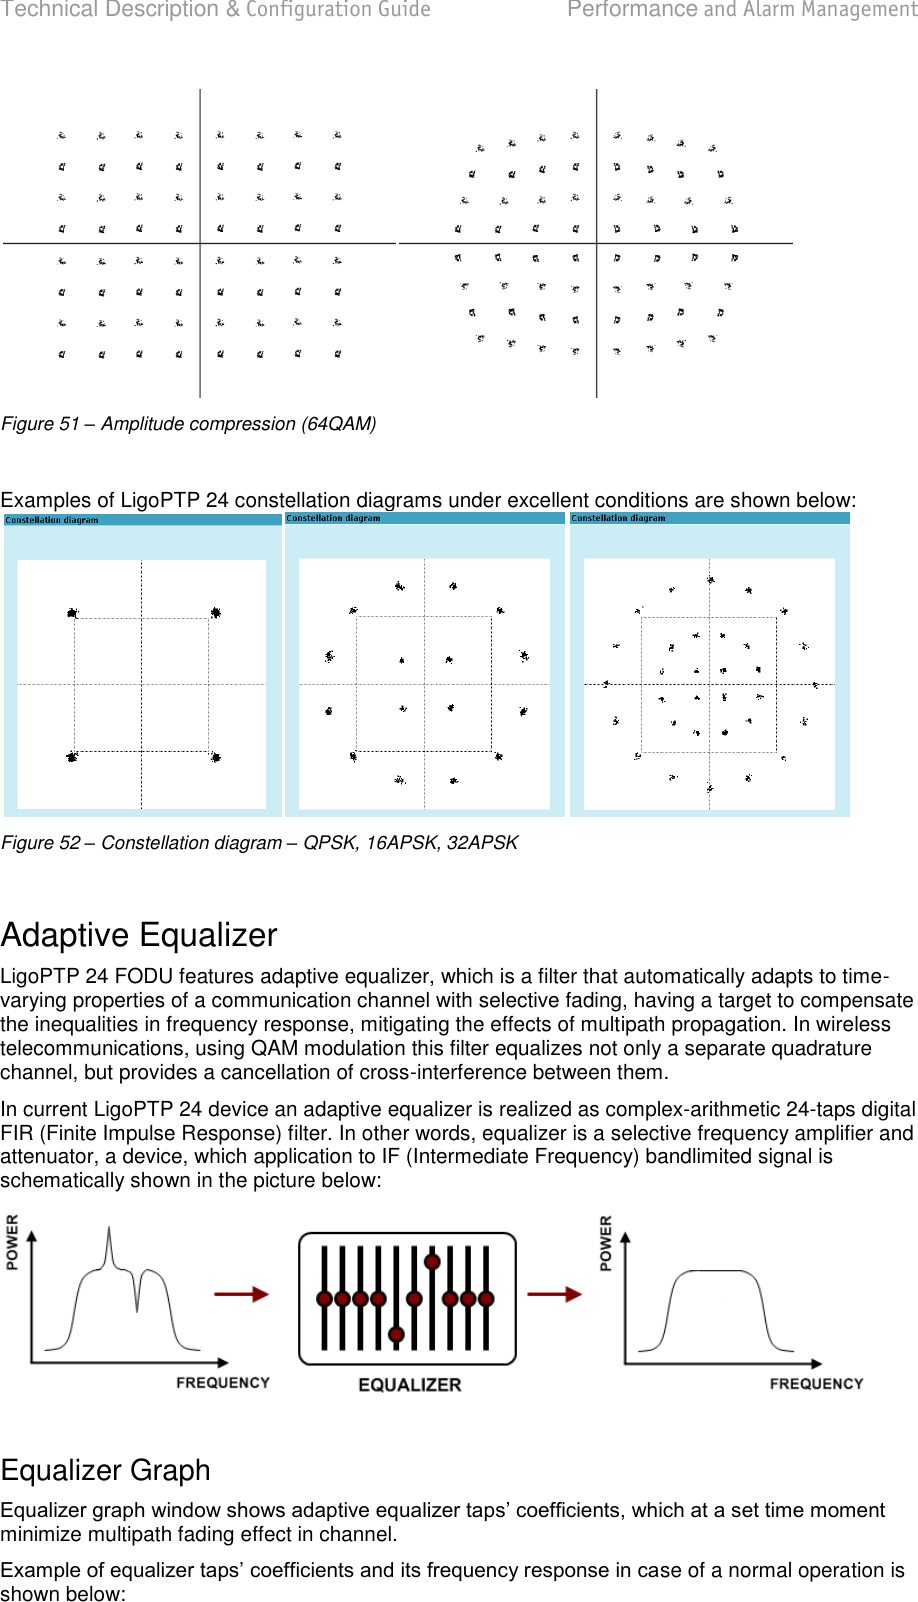 Technical Description &amp; Configuration Guide  Performance and Alarm Management  LigoWave  Page 70  Figure 51 – Amplitude compression (64QAM)  Examples of LigoPTP 24 constellation diagrams under excellent conditions are shown below:  Figure 52 – Constellation diagram – QPSK, 16APSK, 32APSK   Adaptive Equalizer LigoPTP 24 FODU features adaptive equalizer, which is a filter that automatically adapts to time-varying properties of a communication channel with selective fading, having a target to compensate the inequalities in frequency response, mitigating the effects of multipath propagation. In wireless telecommunications, using QAM modulation this filter equalizes not only a separate quadrature channel, but provides a cancellation of cross-interference between them. In current LigoPTP 24 device an adaptive equalizer is realized as complex-arithmetic 24-taps digital FIR (Finite Impulse Response) filter. In other words, equalizer is a selective frequency amplifier and attenuator, a device, which application to IF (Intermediate Frequency) bandlimited signal is schematically shown in the picture below:   Equalizer Graph minimize multipath fading effect in channel. se of a normal operation is shown below: 